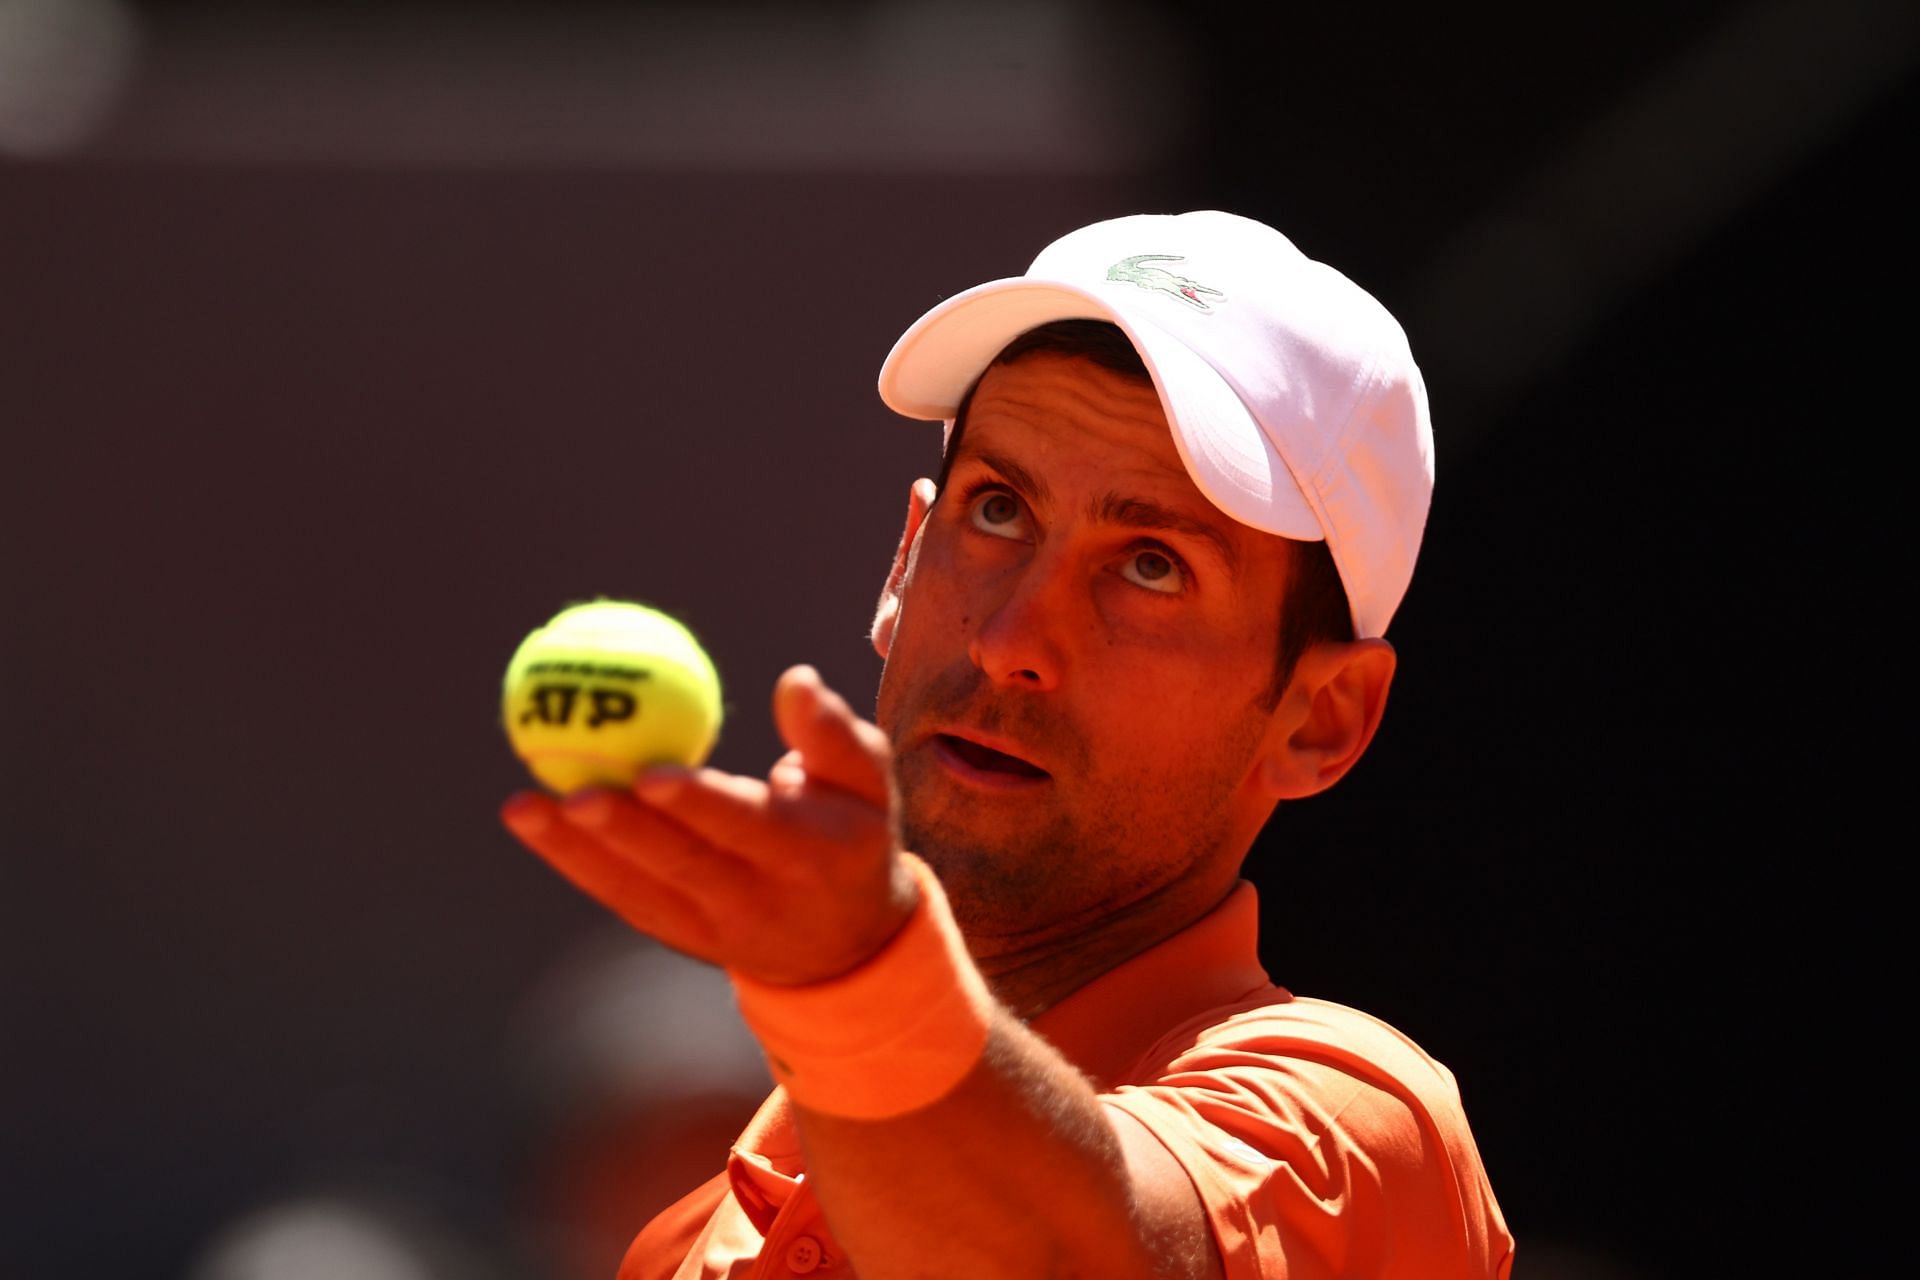 Djokovic&#039;s preparedness ahead of the French Open has been a major talking point